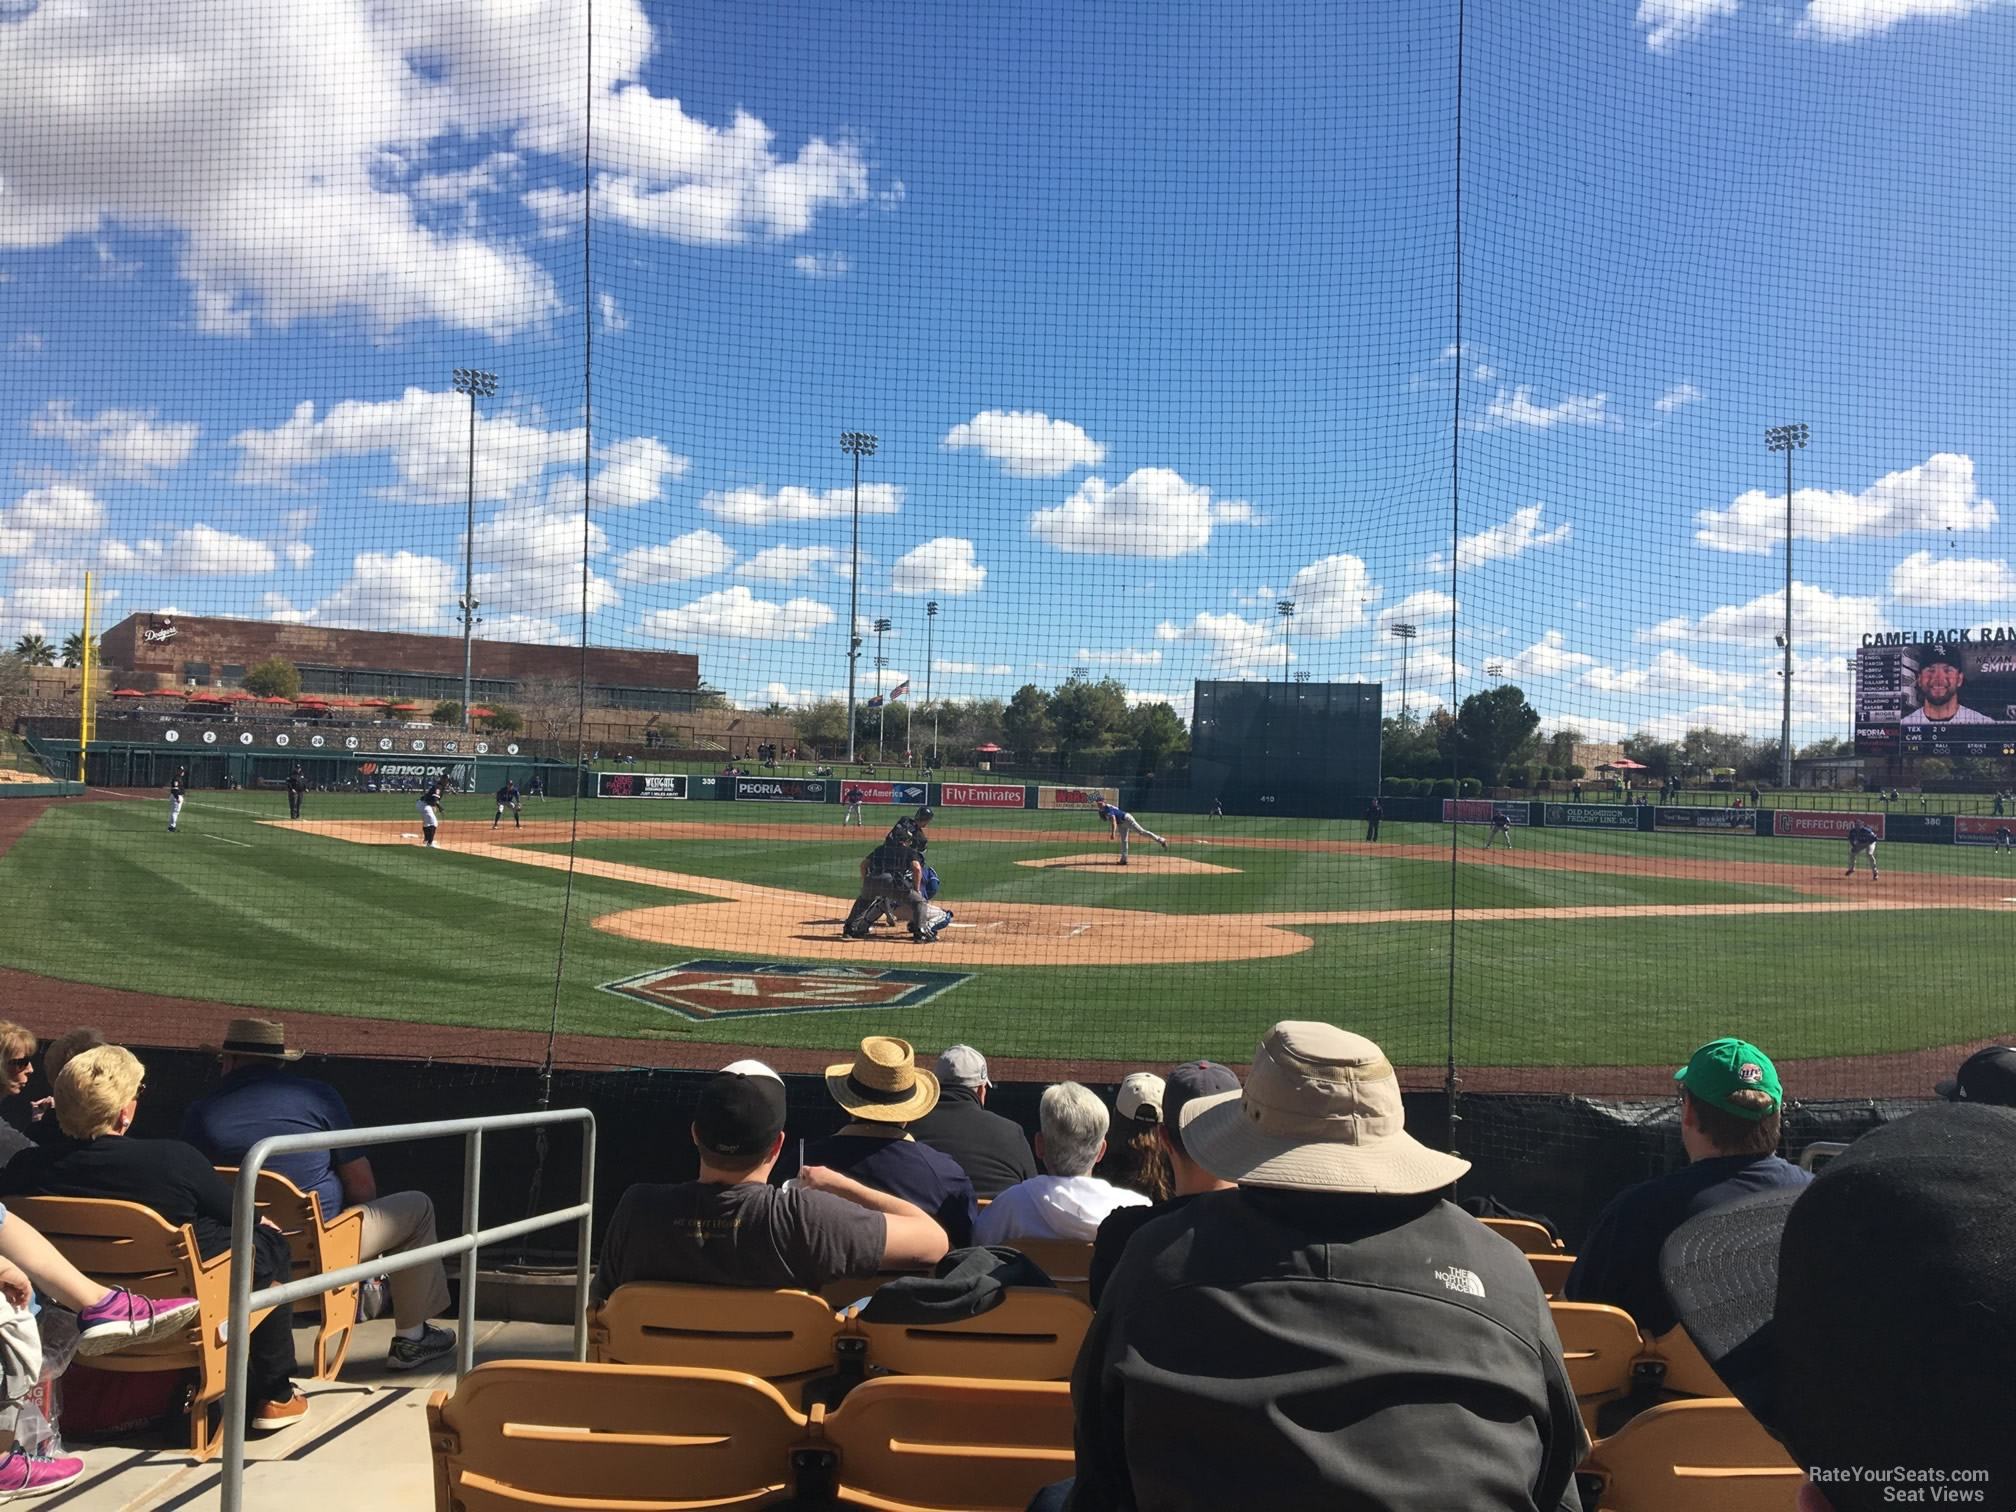 section 14, row 6 seat view  - camelback ranch